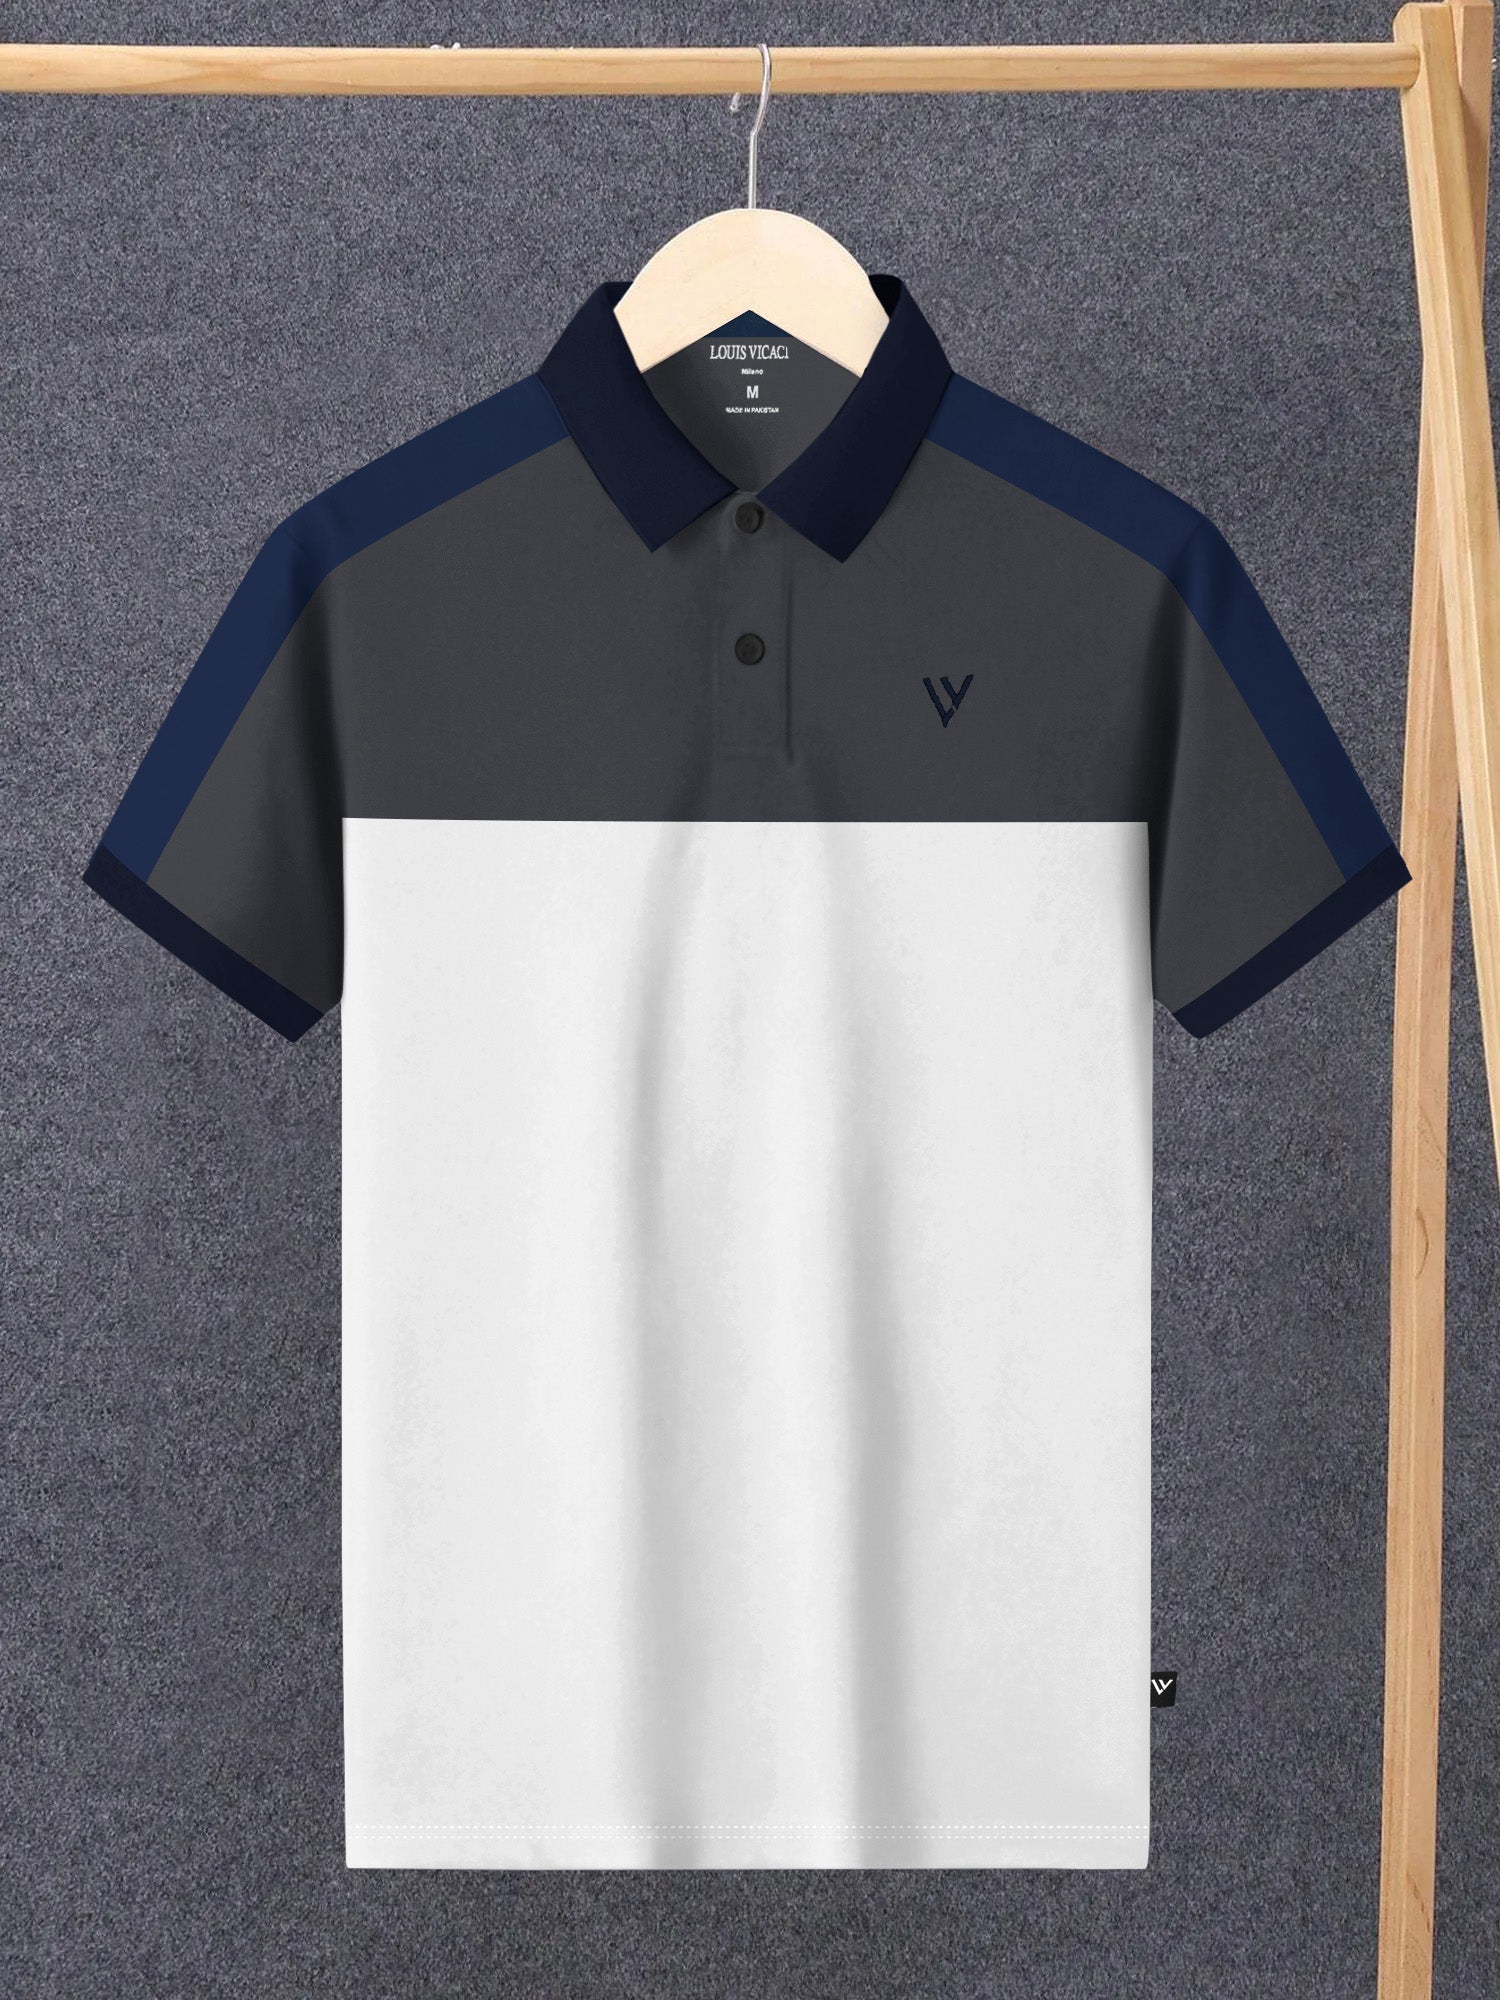 LV Summer Polo Shirt For Men-White with Dark Grey-BE819/BR13059